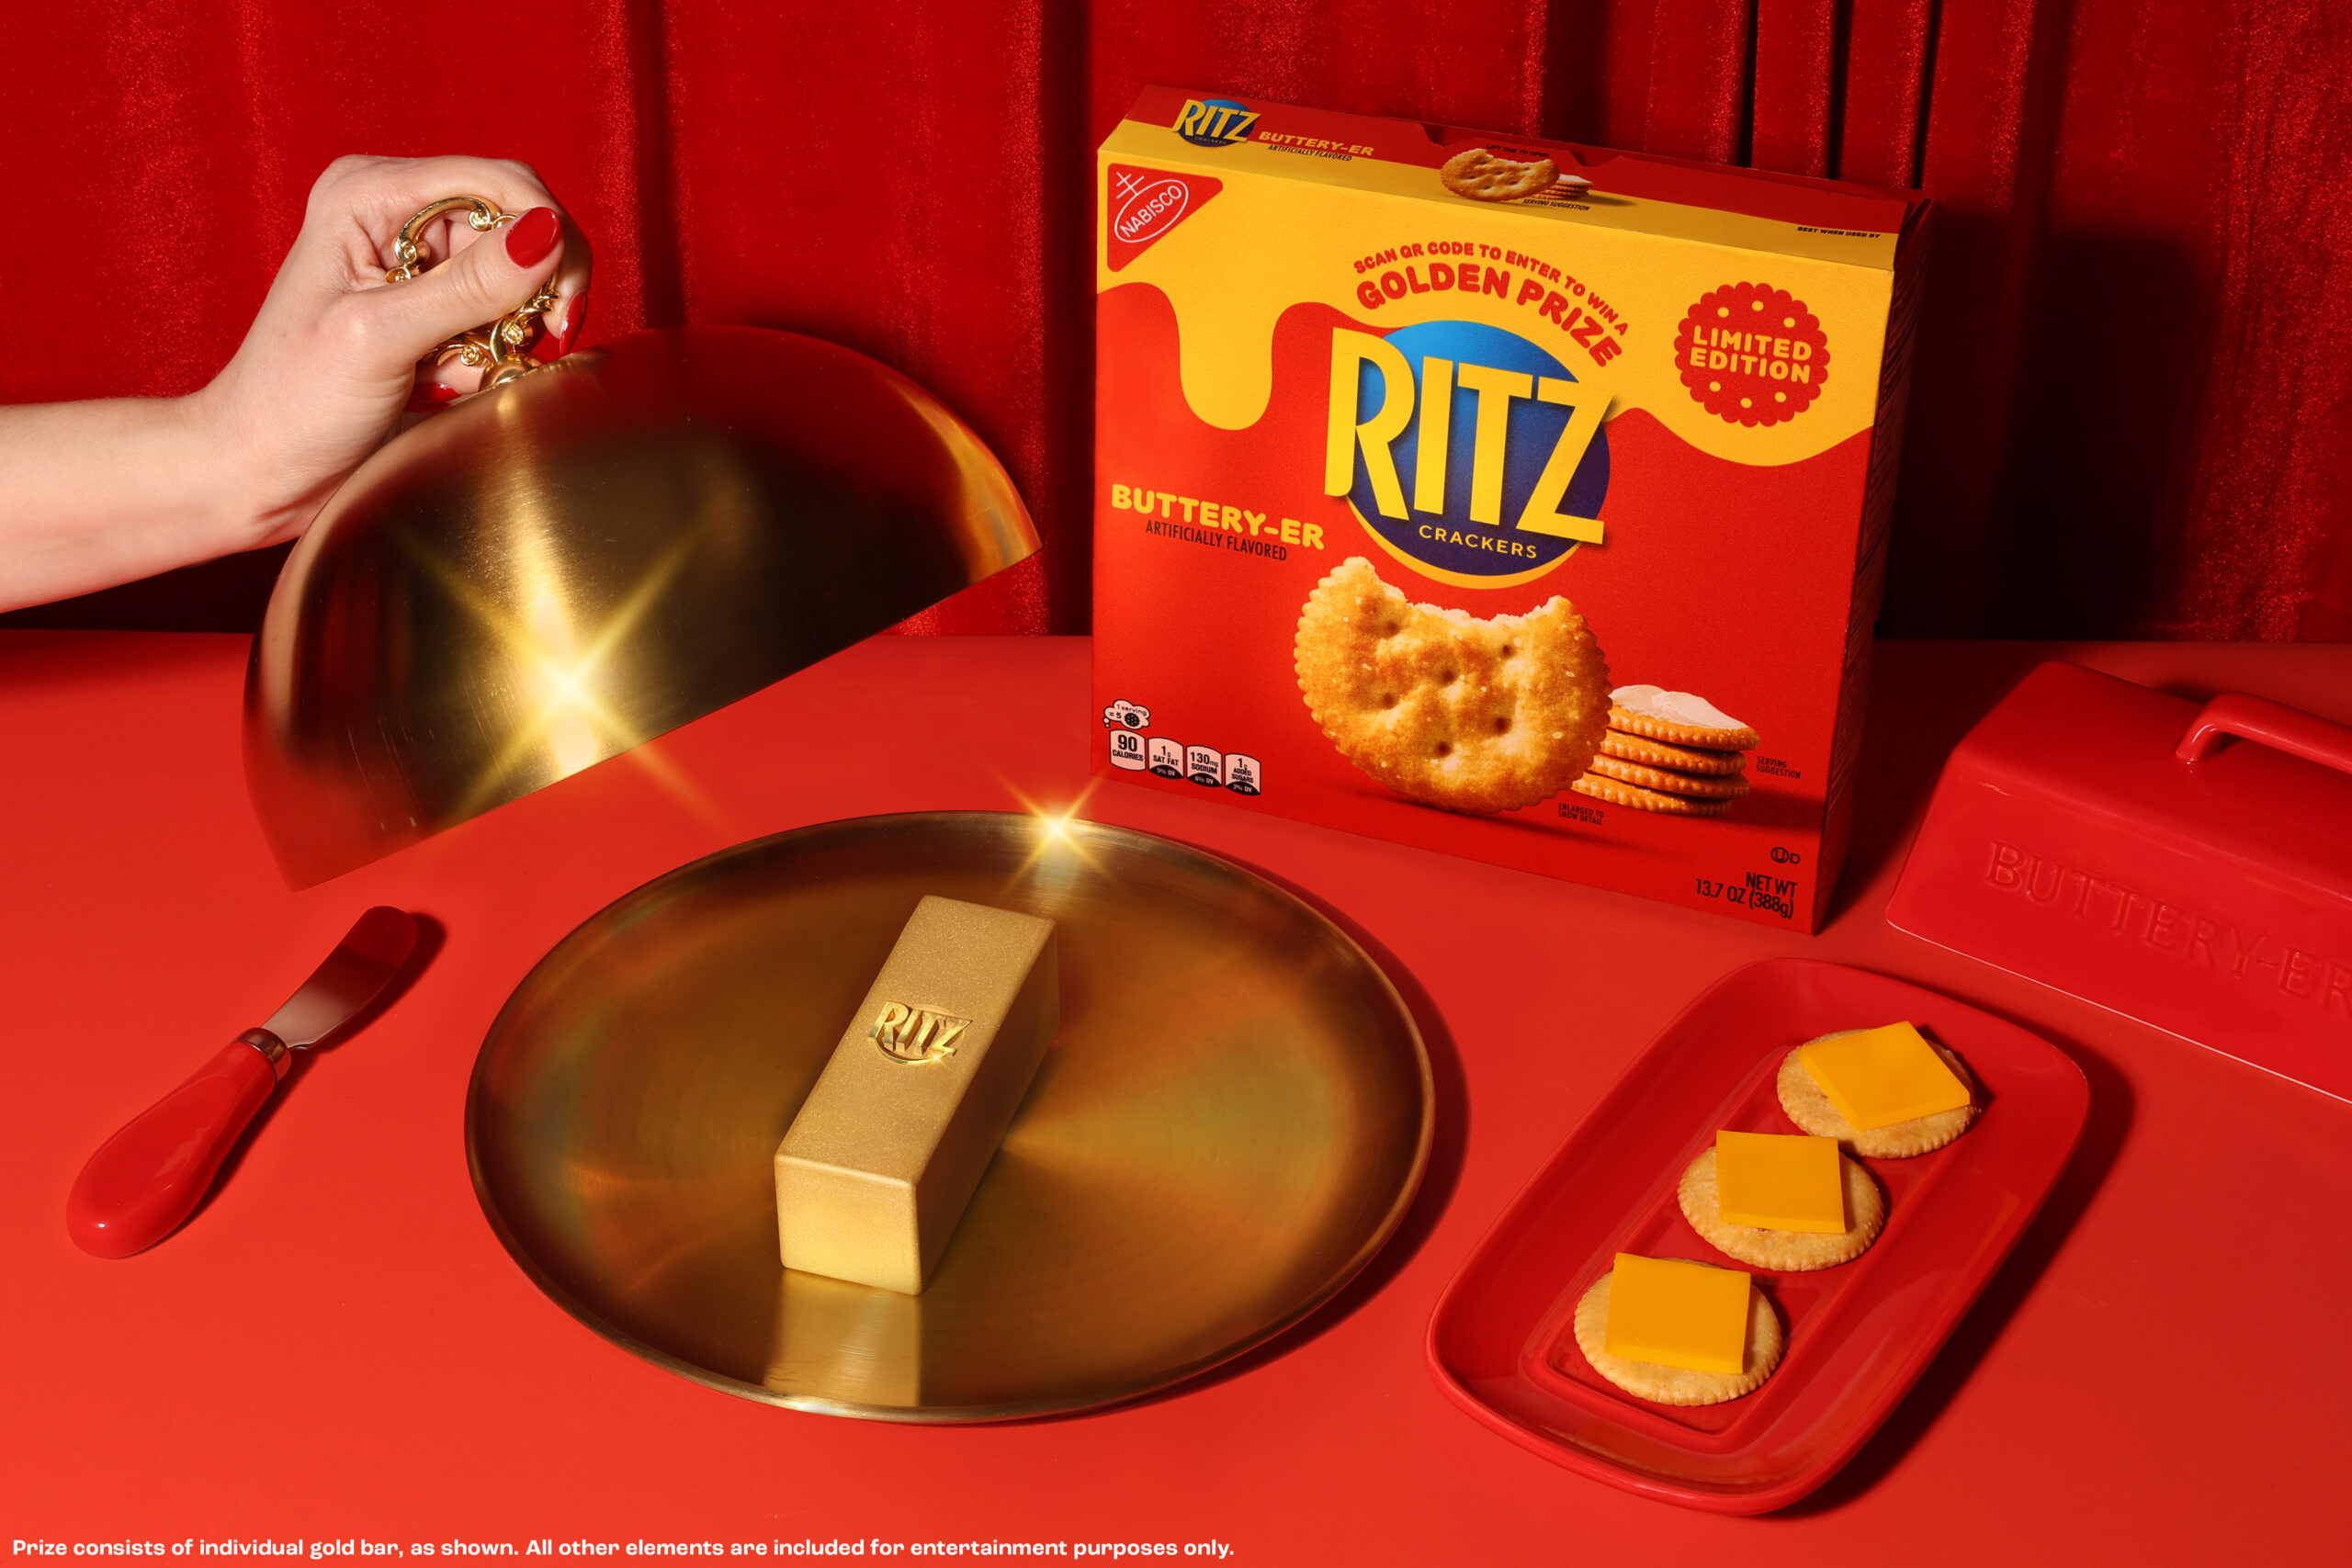 RITZ Makes a Splash on TikTok With its Buttery-er Crackers Campaign